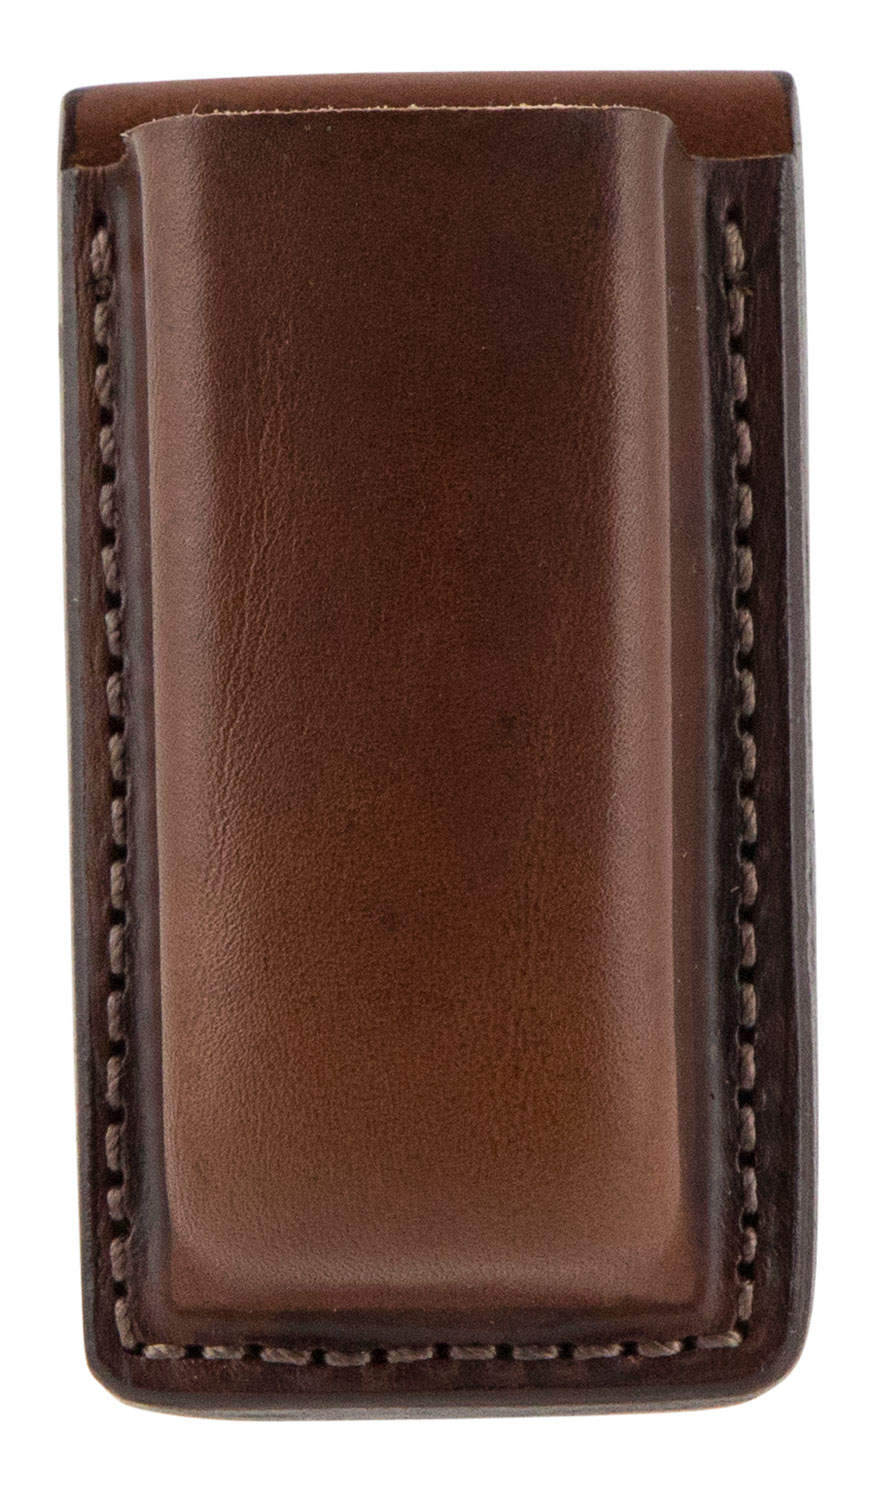 Bianchi 18055 Open Top Mag Pouch  Single Tan Leather Belt Clip, Belts 1.75